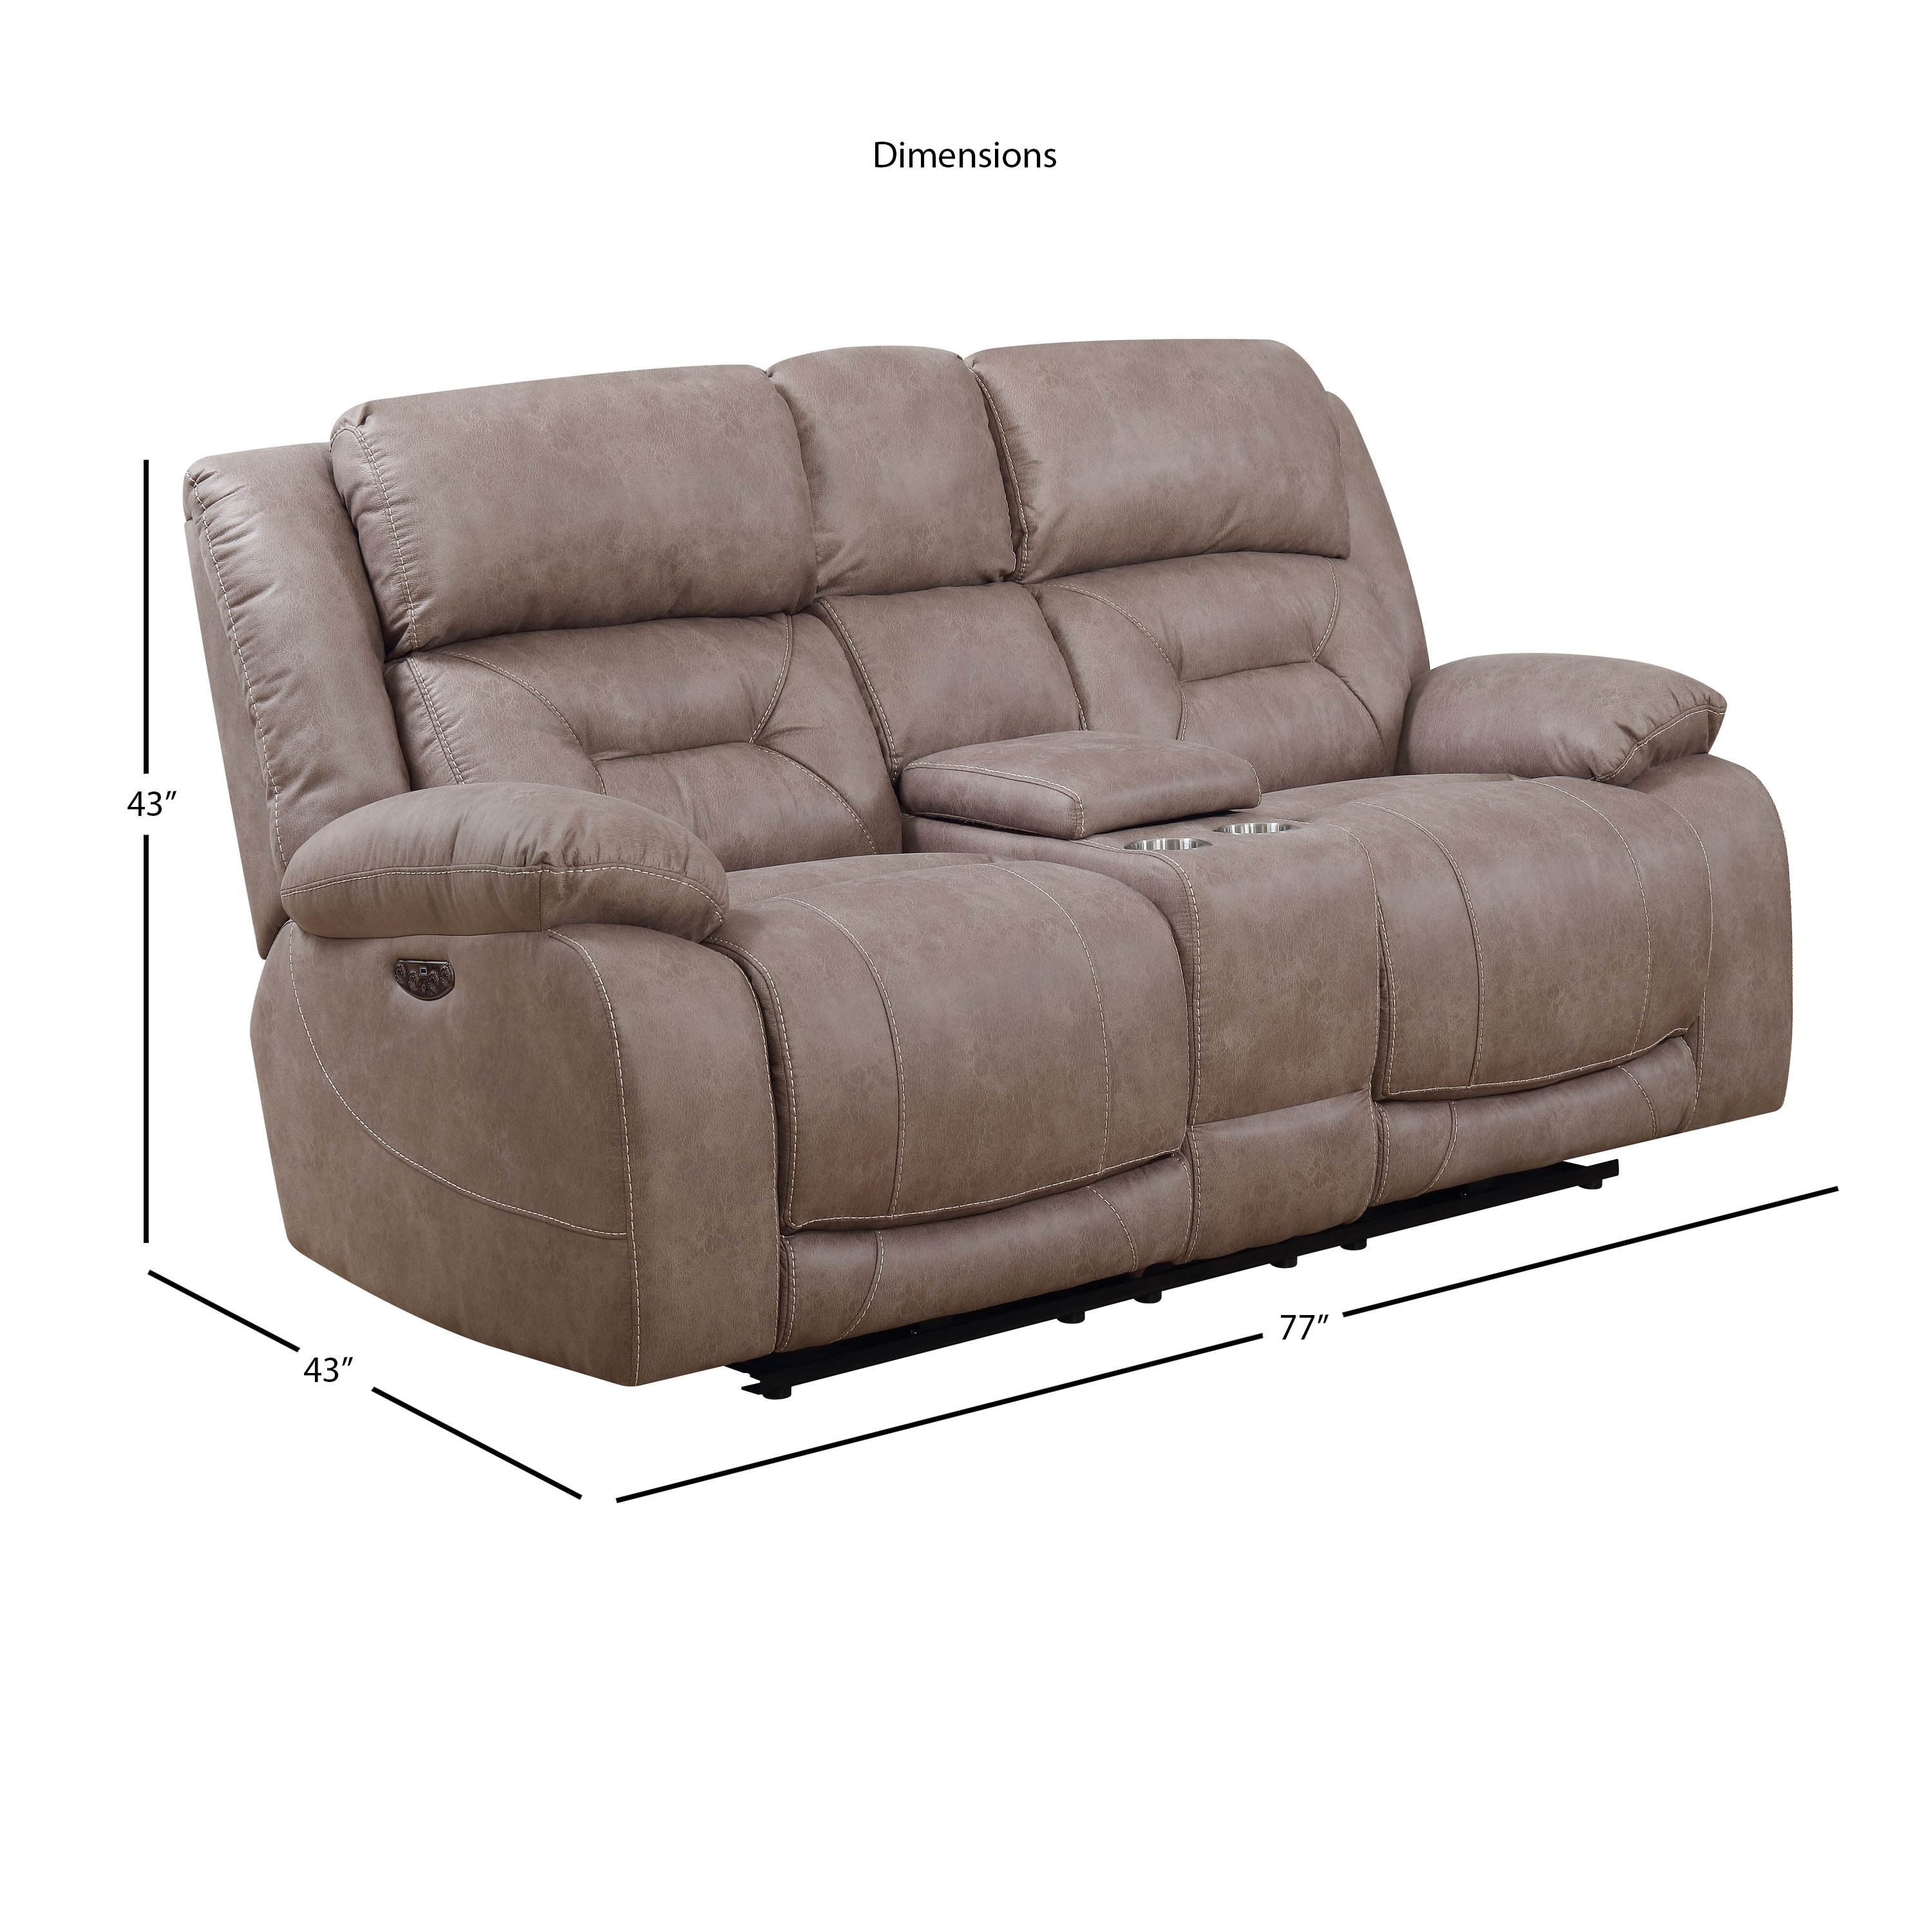 Asbury Power Reclining Loveseat with Console by Greyson Living - Saddle Brown